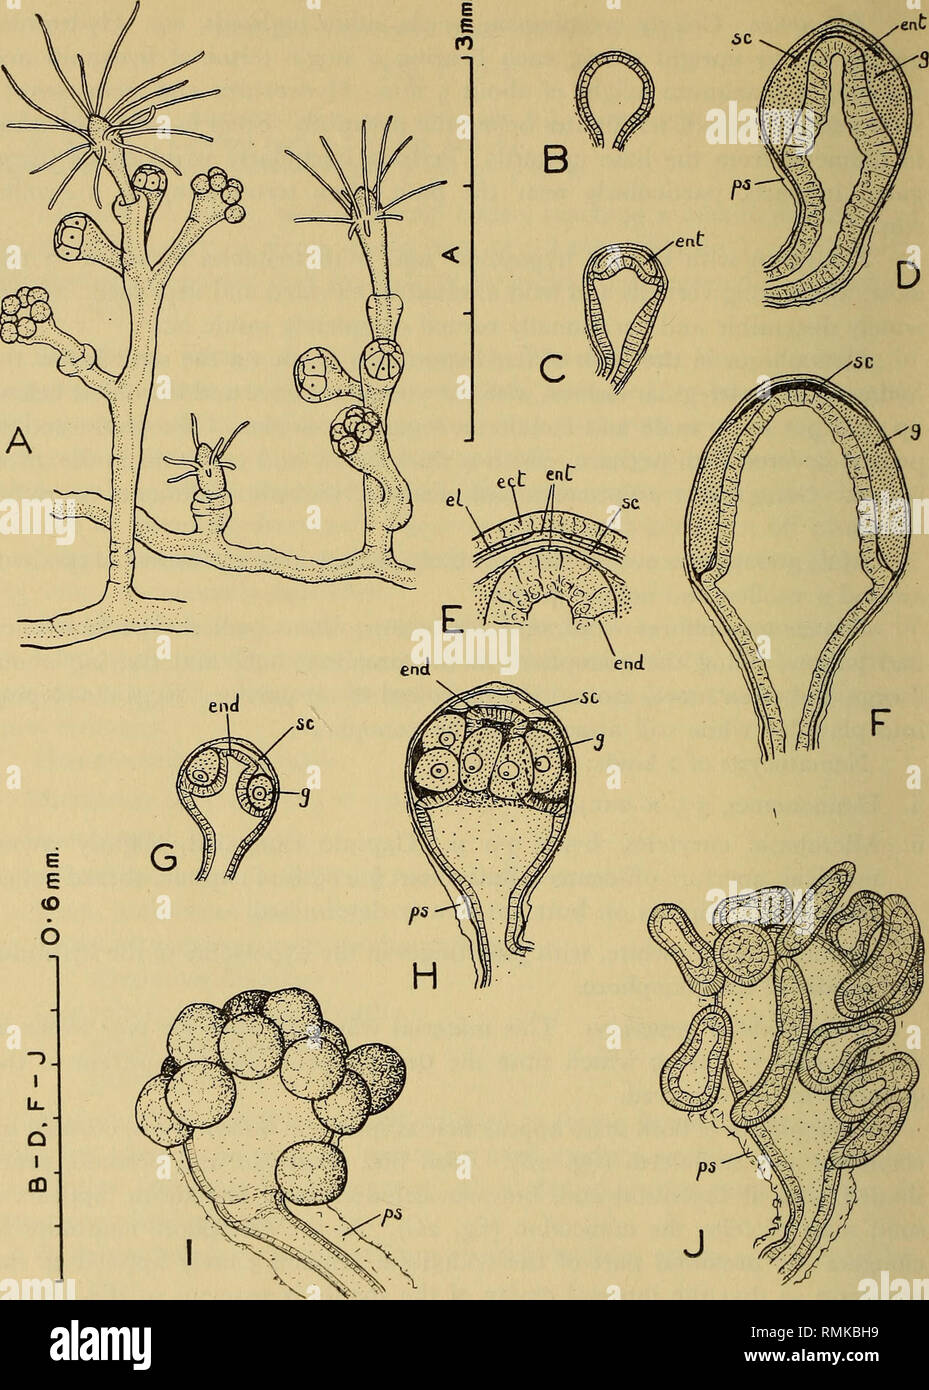 . Annals of the South African Museum = Annale van die Suid-Afrikaanse Museum. Natural history. 246 ANNALS OF THE SOUTH AFRICAN MUSEUM. Fig. 2. Rhizorhagium navis n. sp. A, part of a female colony drawn from living material. B-J, stages in the development of the gonophores drawn from whole mounts. B, a young male gonophorc. C and D, later stages in development of male gonophore. E, the distal region of stage D on a larger scale to show details of layers. F, a mature male gonophore. G, a young female gonophore. H, a mature female gonophore. I, the female gonophore after the escape of the eggs, a Stock Photo